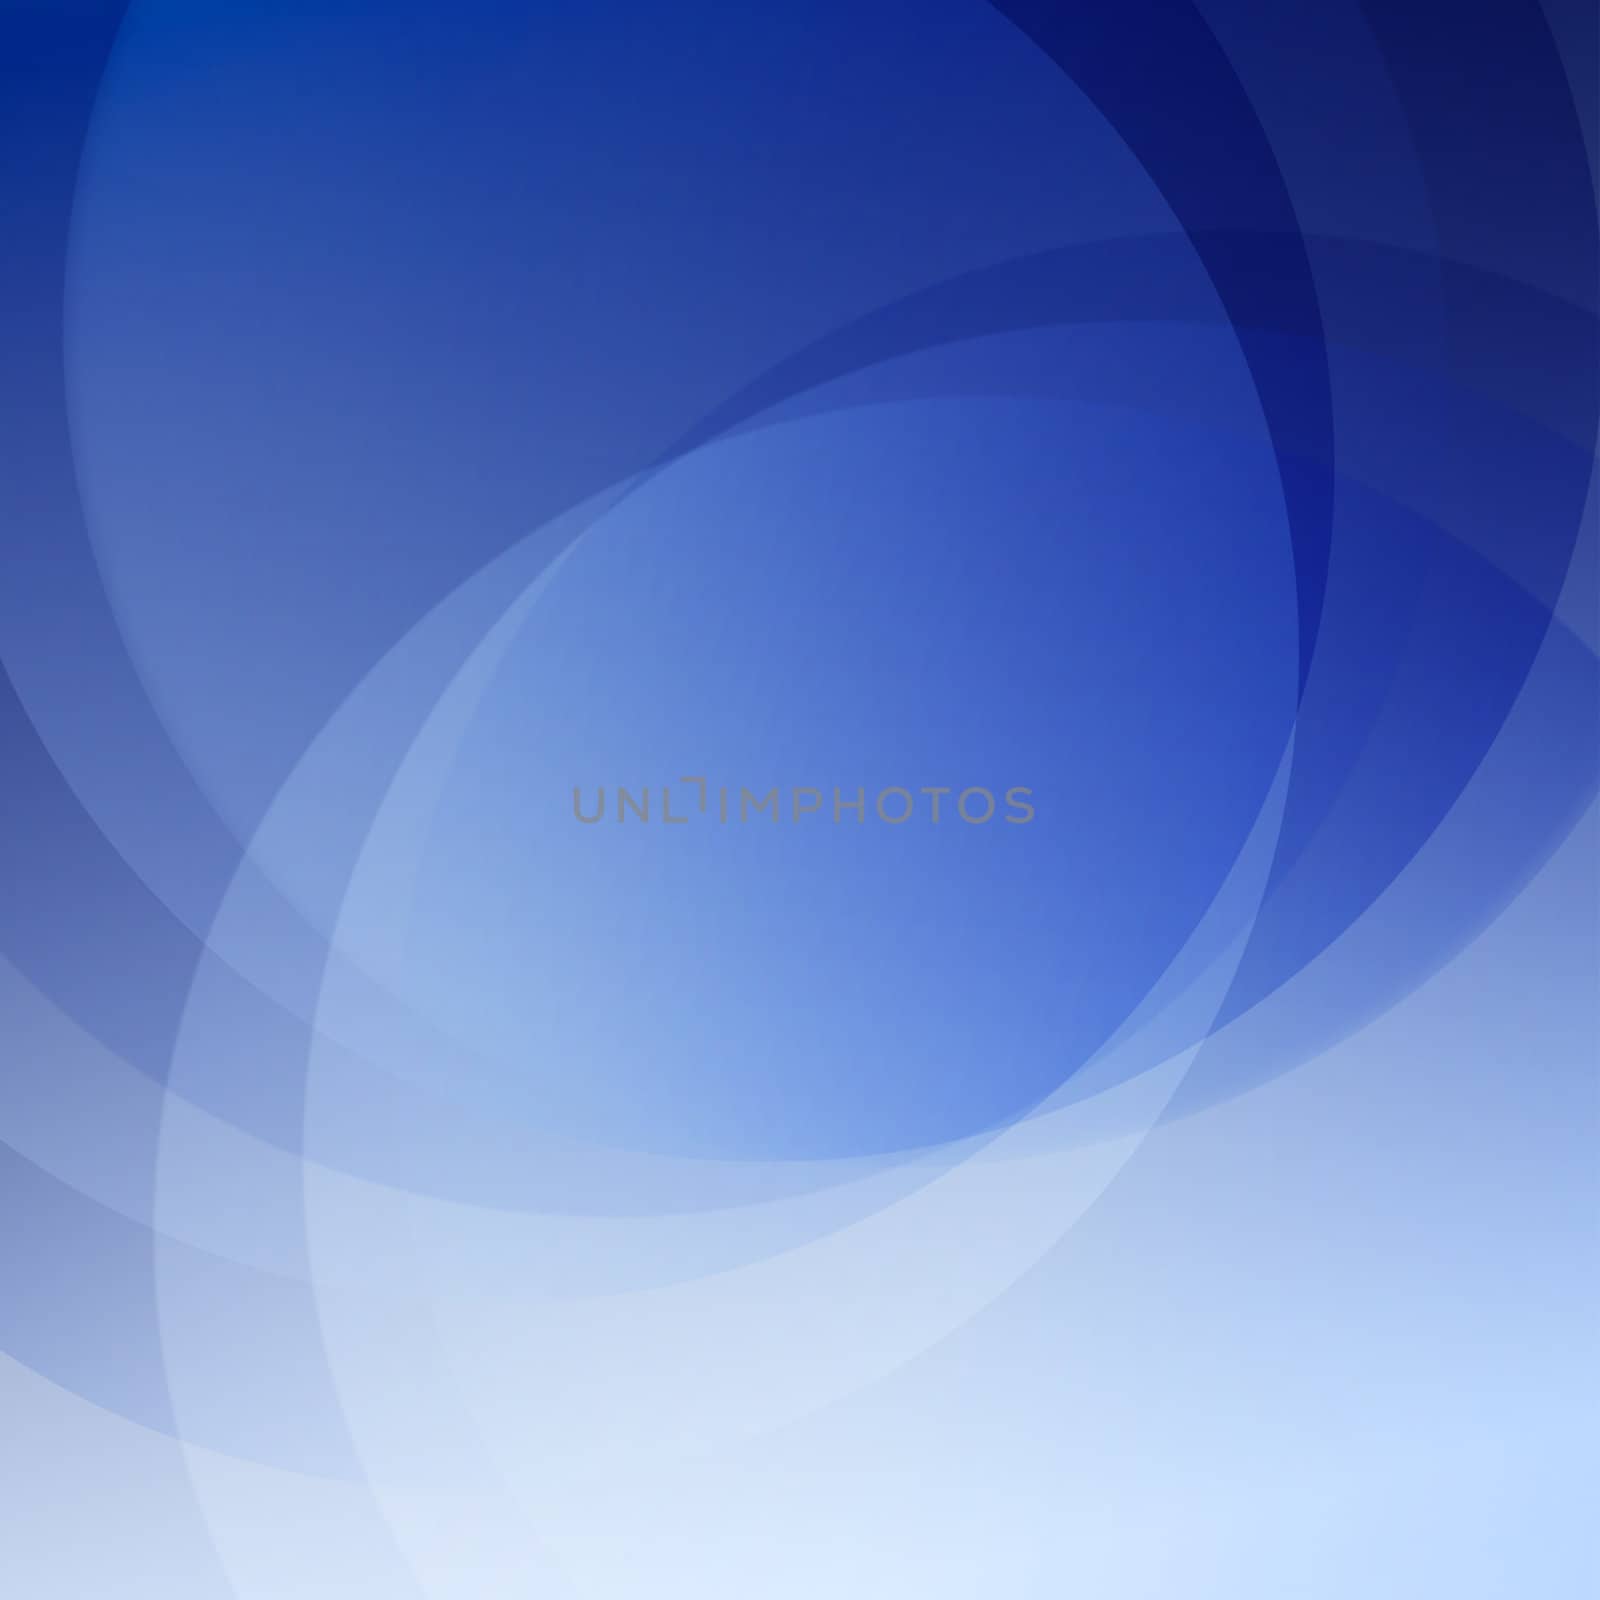 Blue elegance abstract background for yout design 